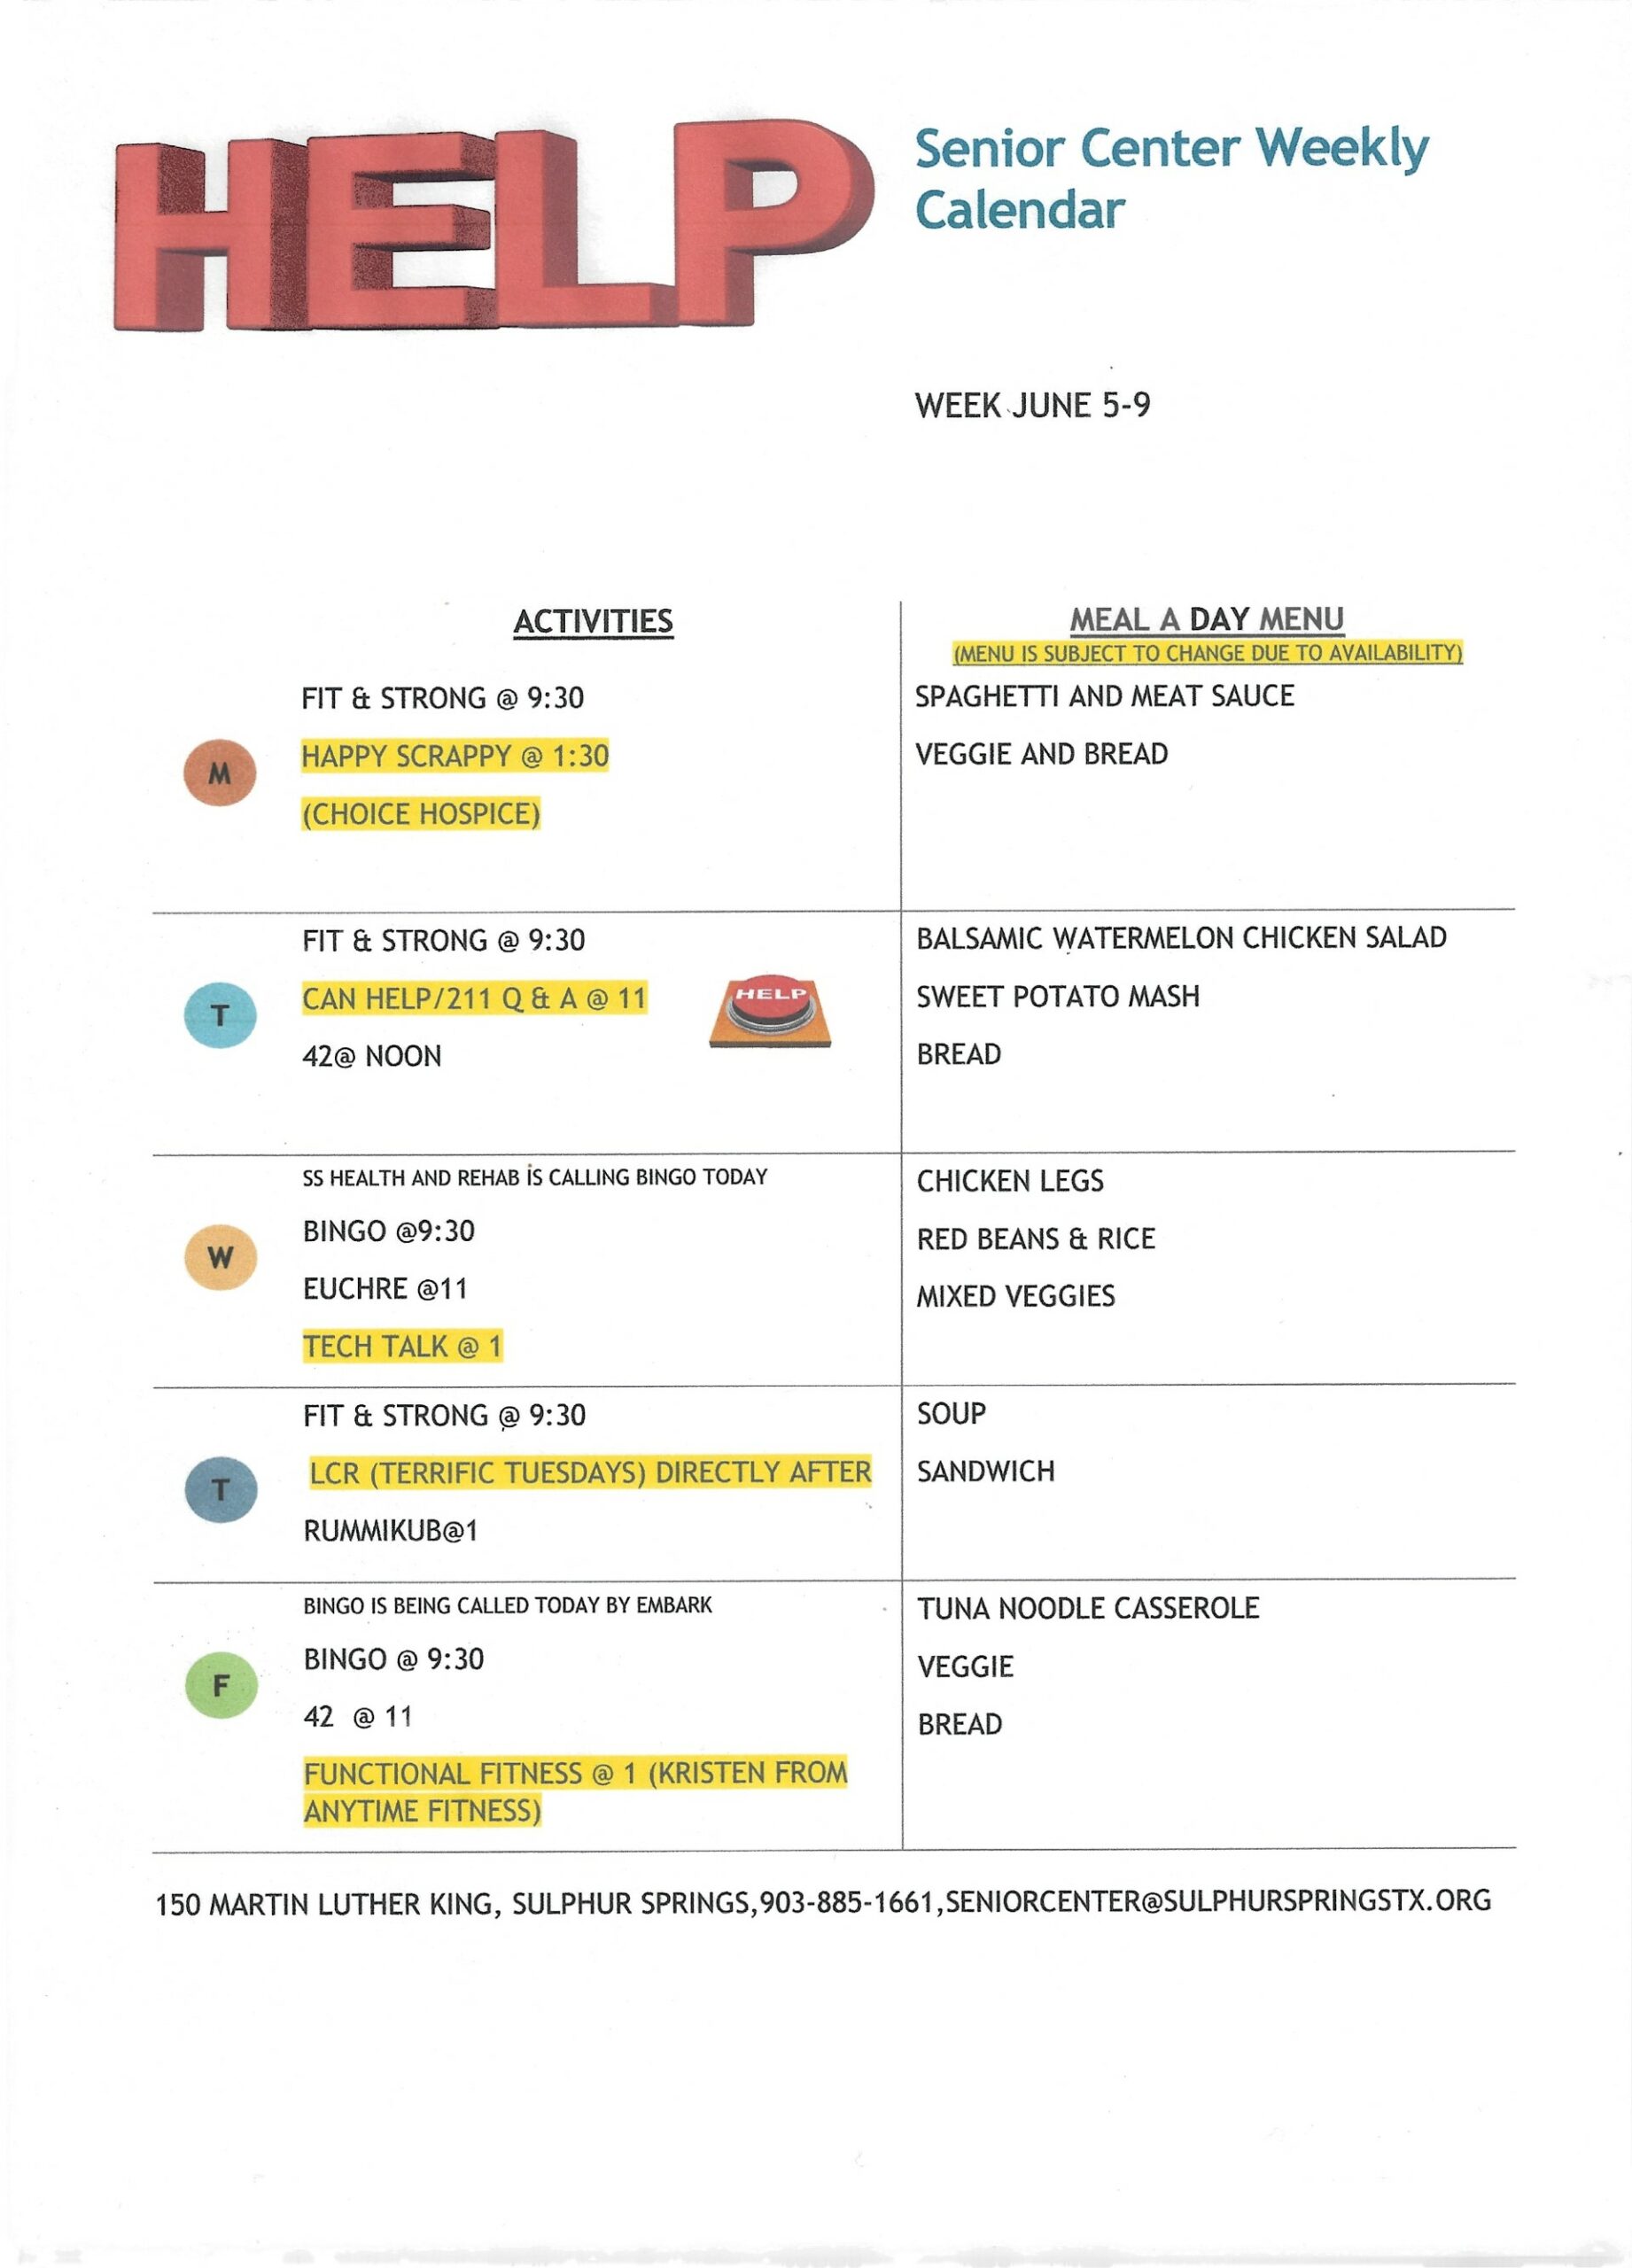 Meal-A-Day For June 5-9